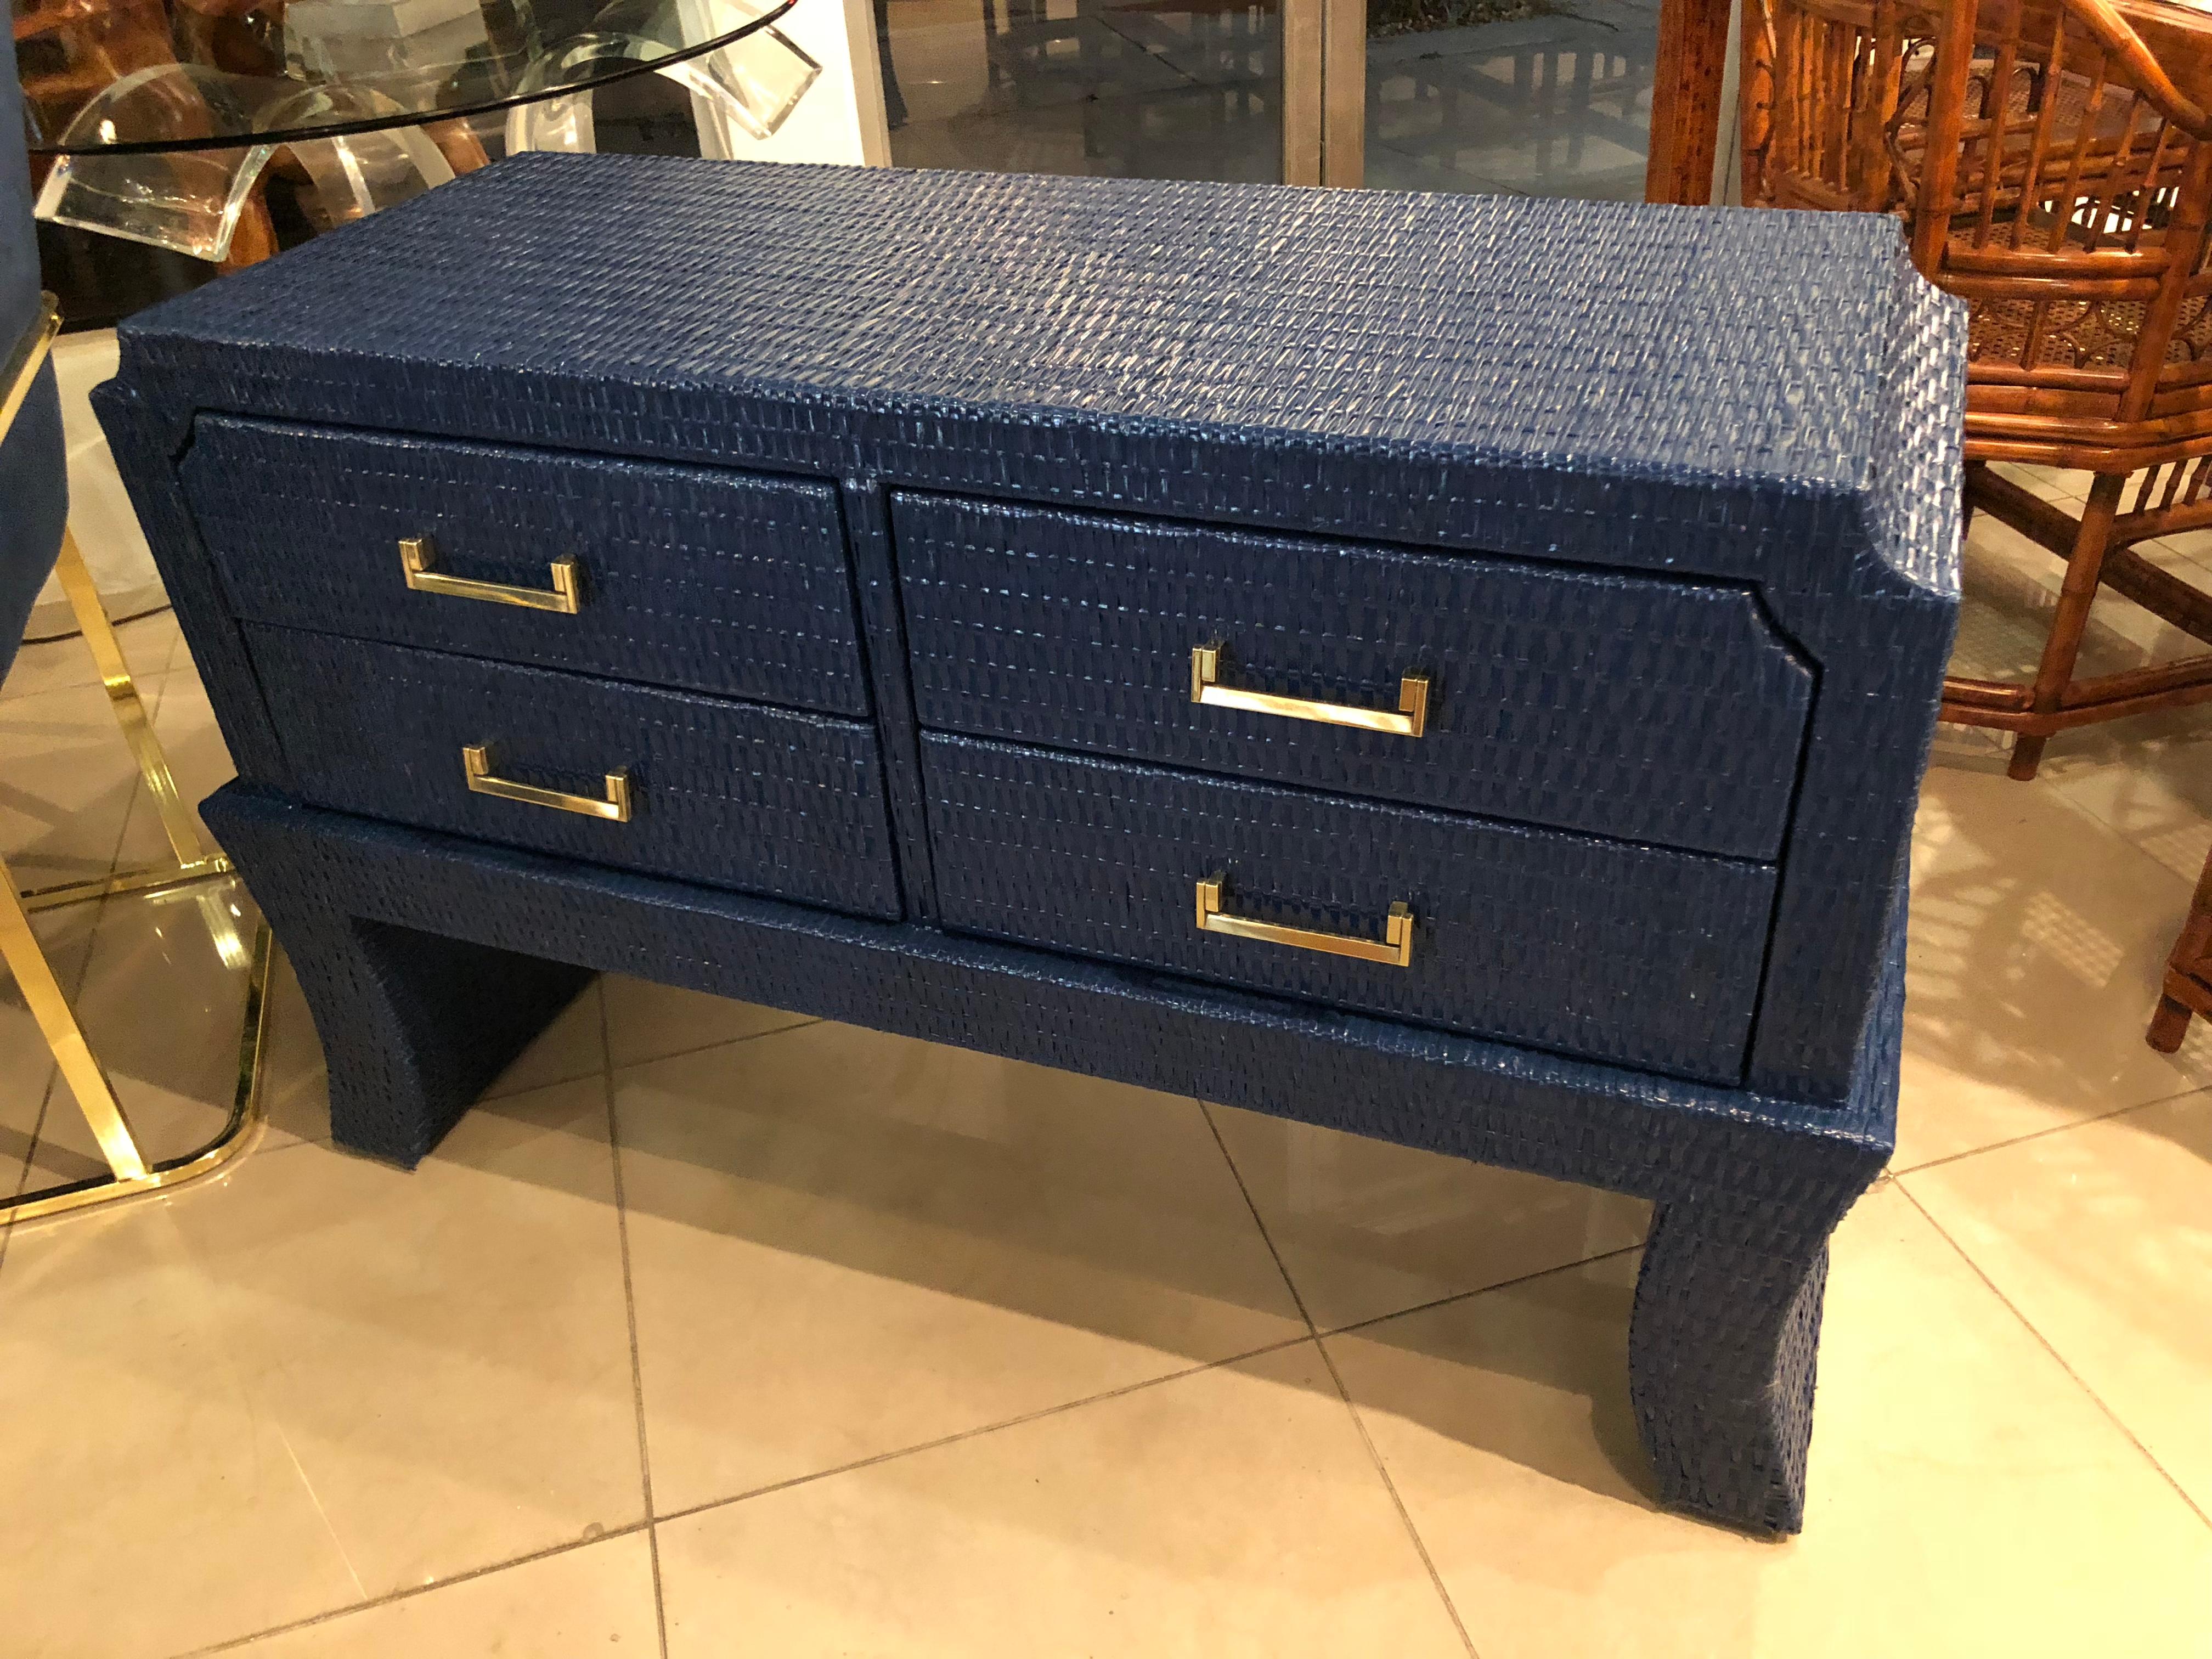 Hollywood Regency Vintage Navy Blue Lacquered Woven Wicker Chest Dresser Credenza Brass Pulls